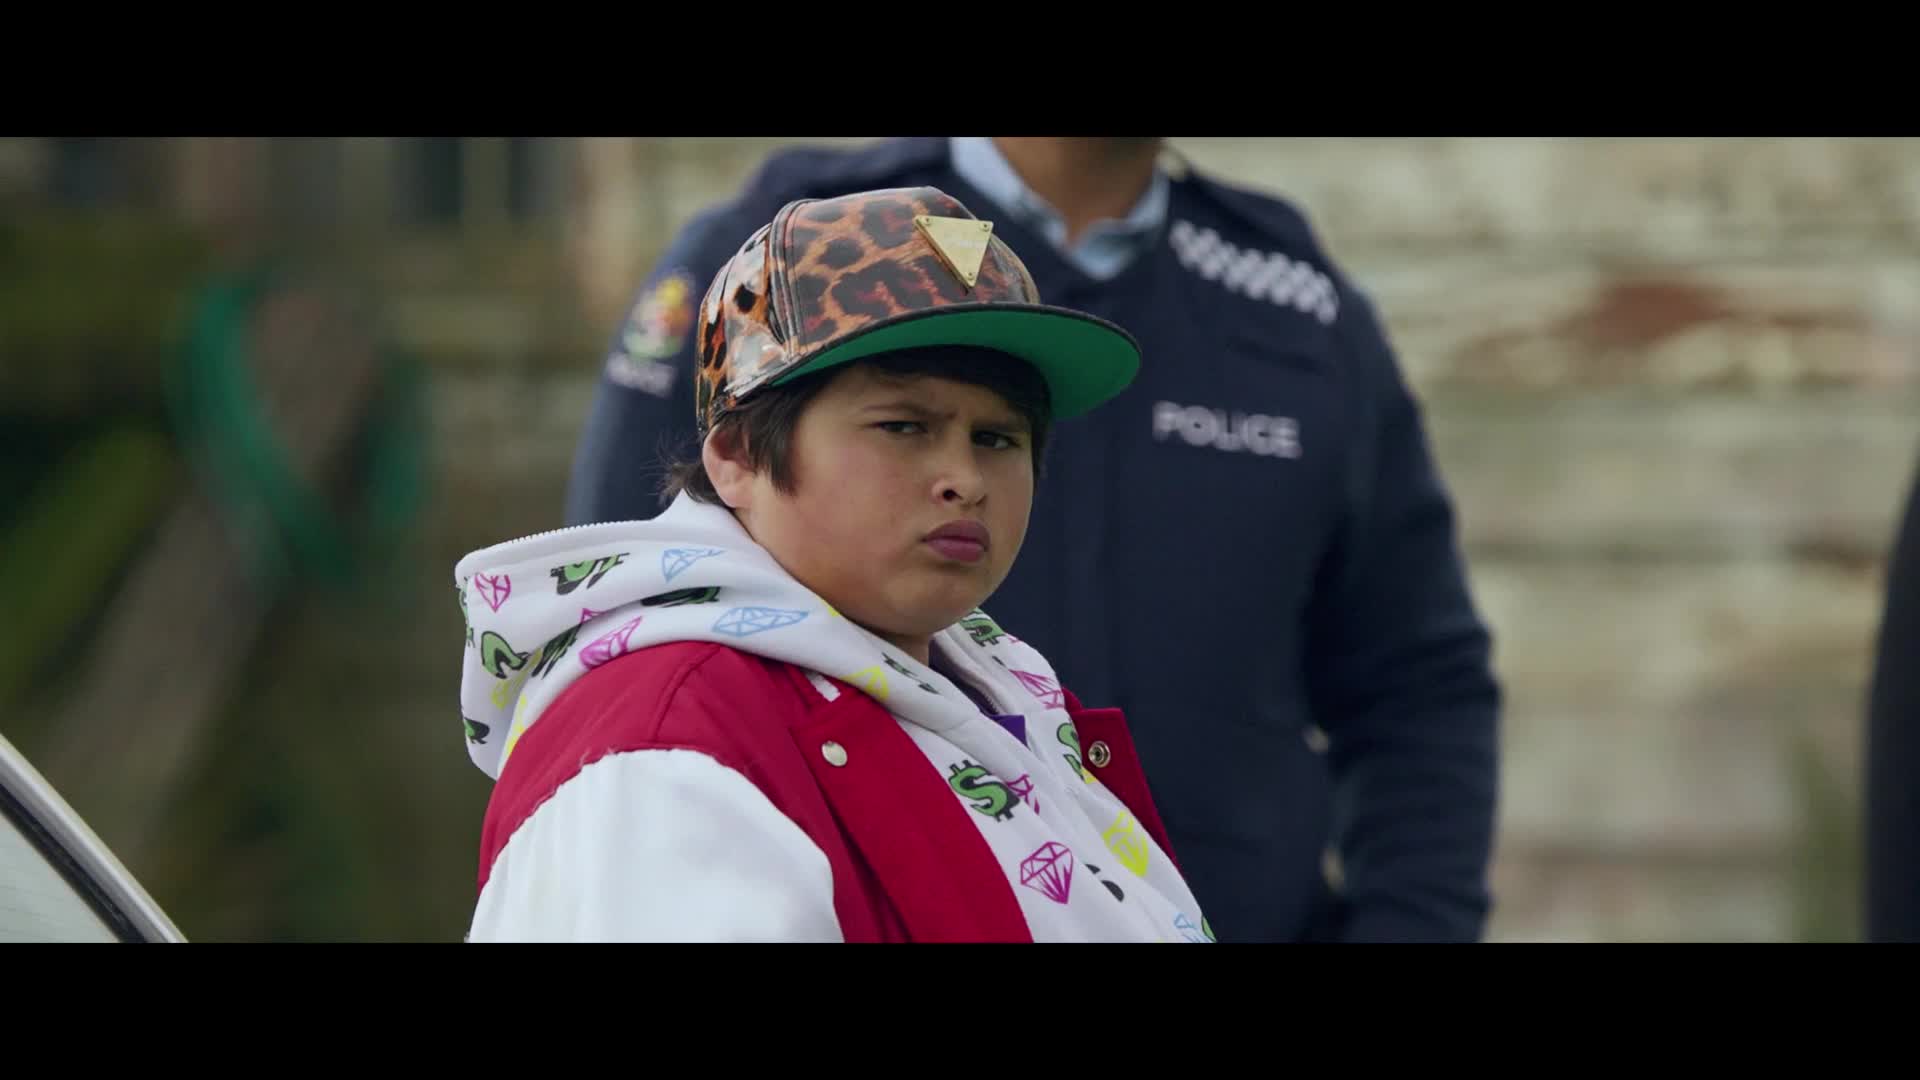 Hunt For The Wilderpeople (Trailer)